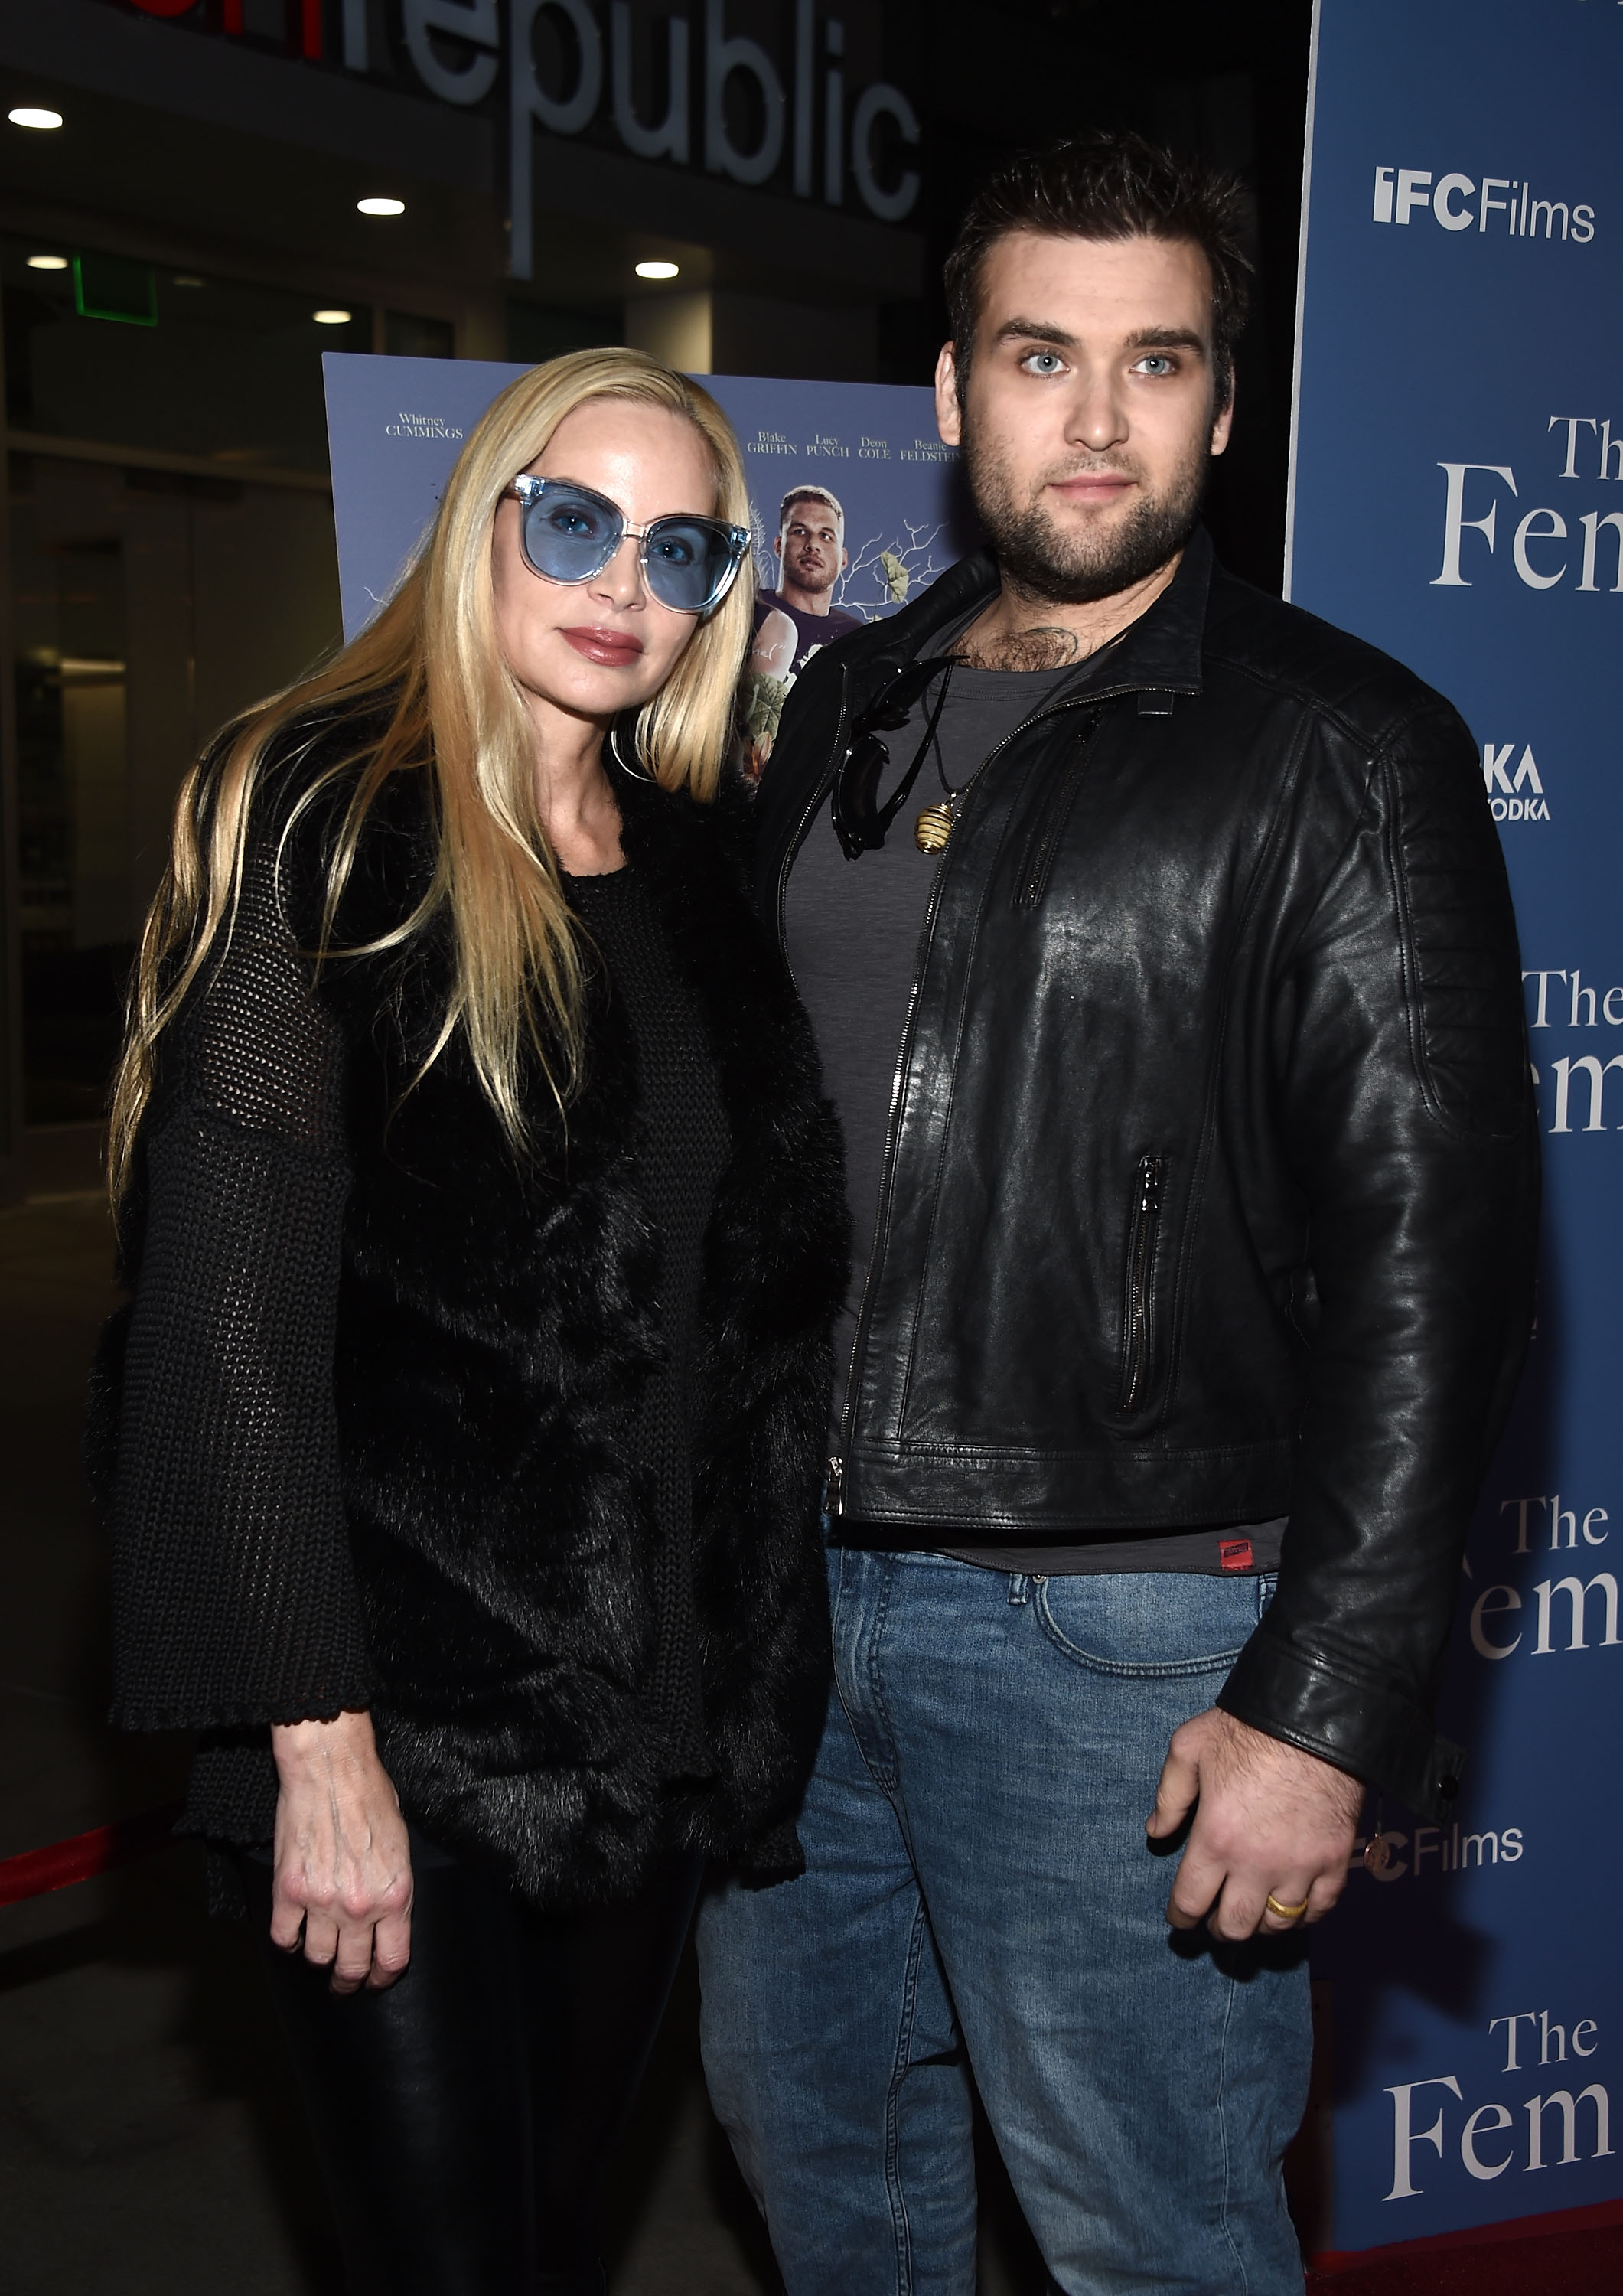 Christina Fulton and Weston Cage arrive at the of "The Female Brain" in Los Angeles in 2018 | Source: Getty Images